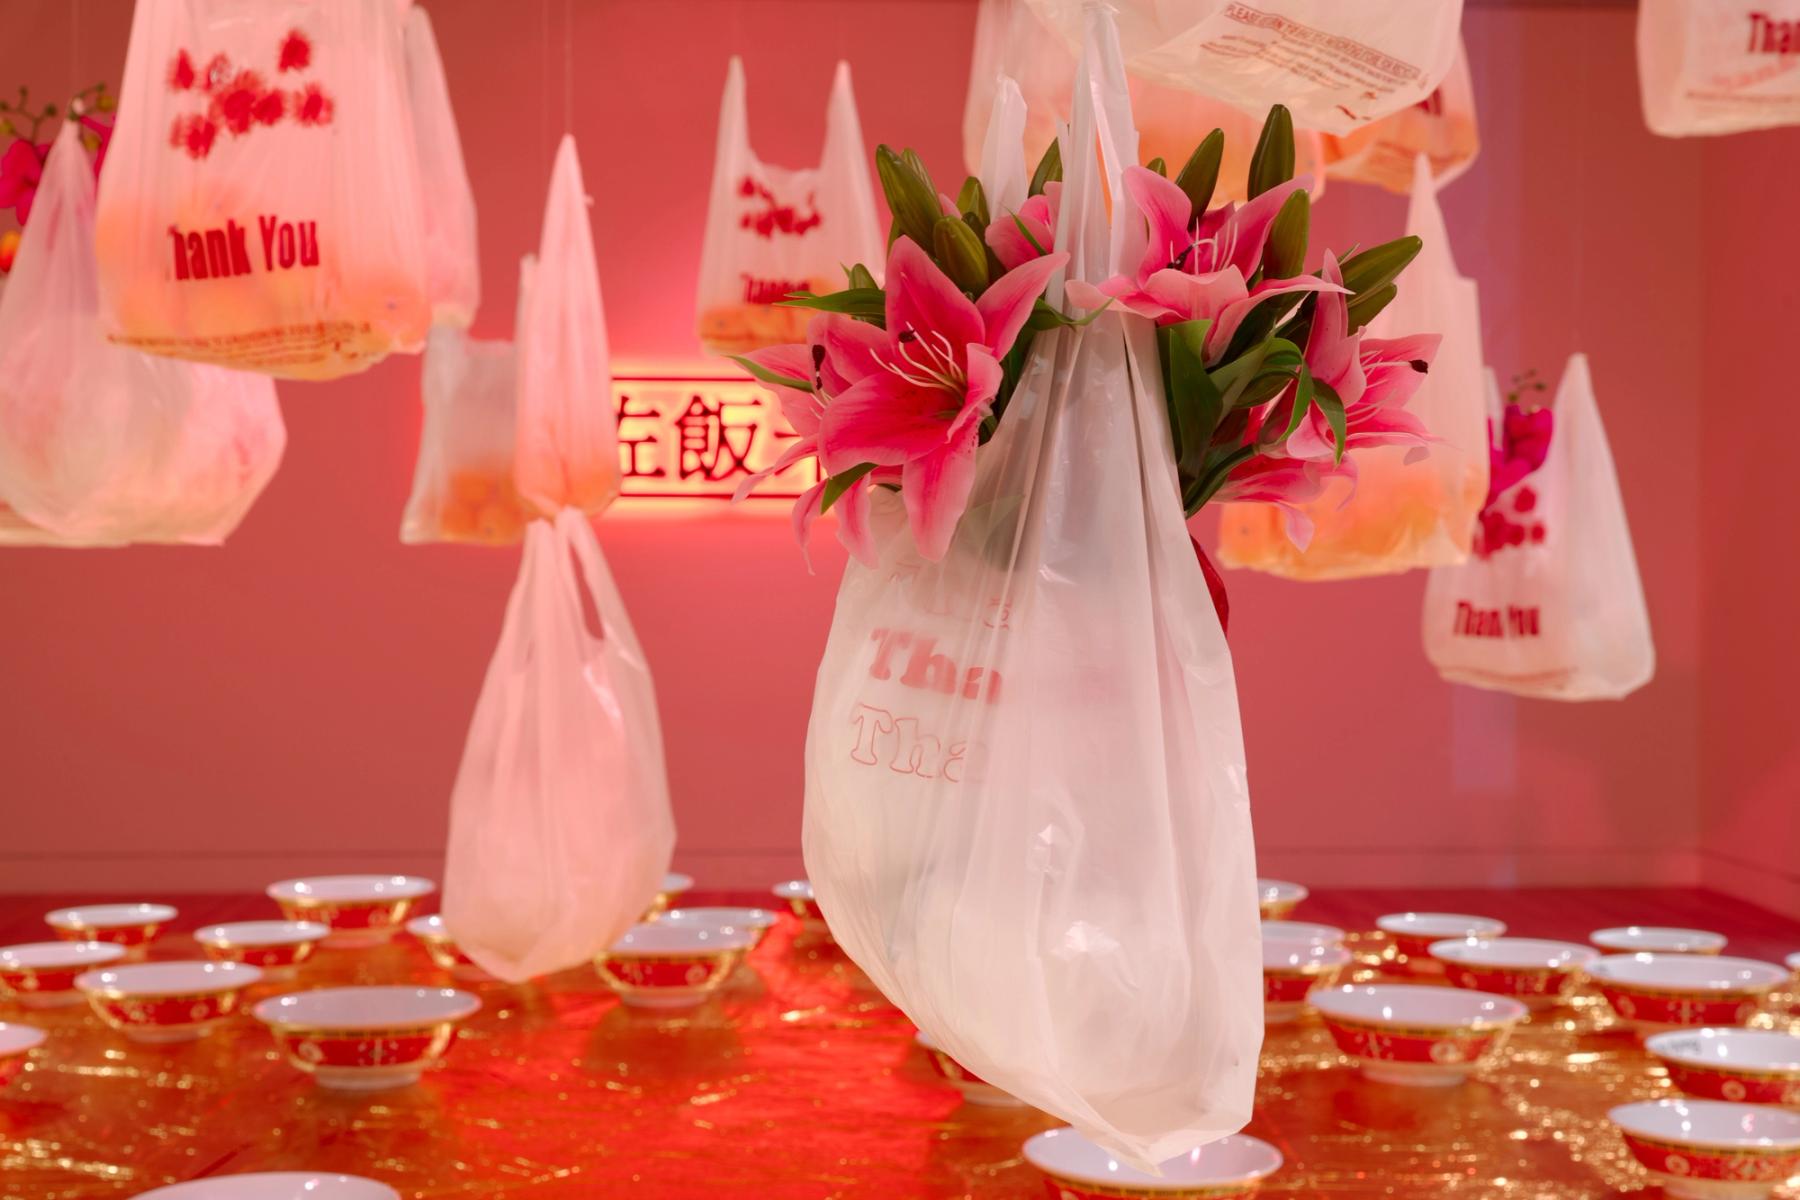 An installation of hanging plastic grocery bags filled with pink lilies over a table of red bowls.